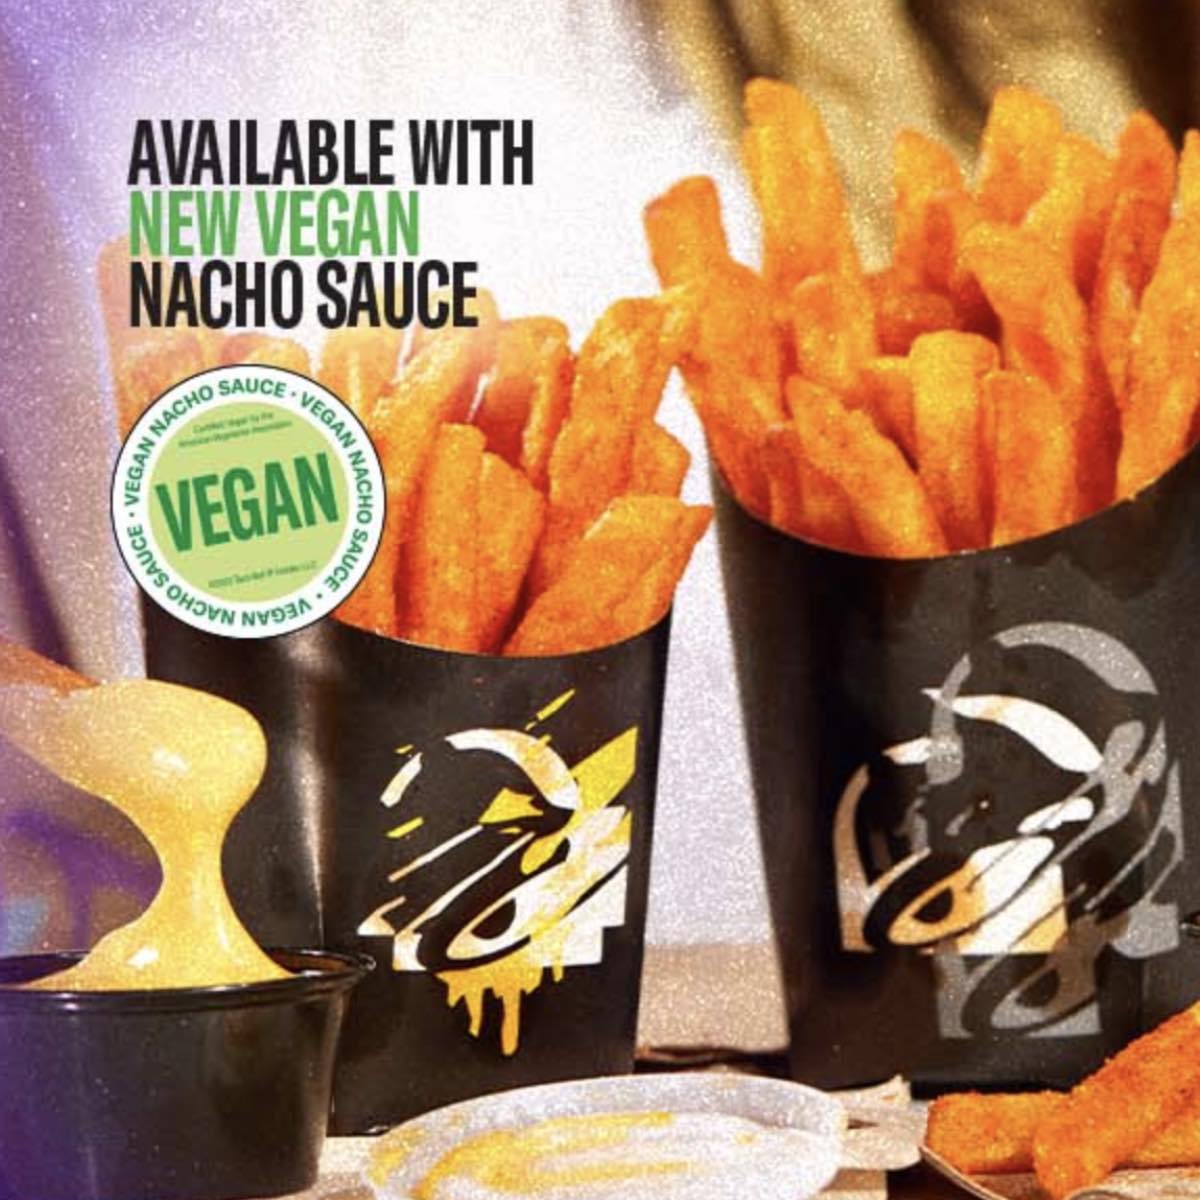 Vegan nacho cheese fries ad that appeared on the Taco Bell homepage during the launch.